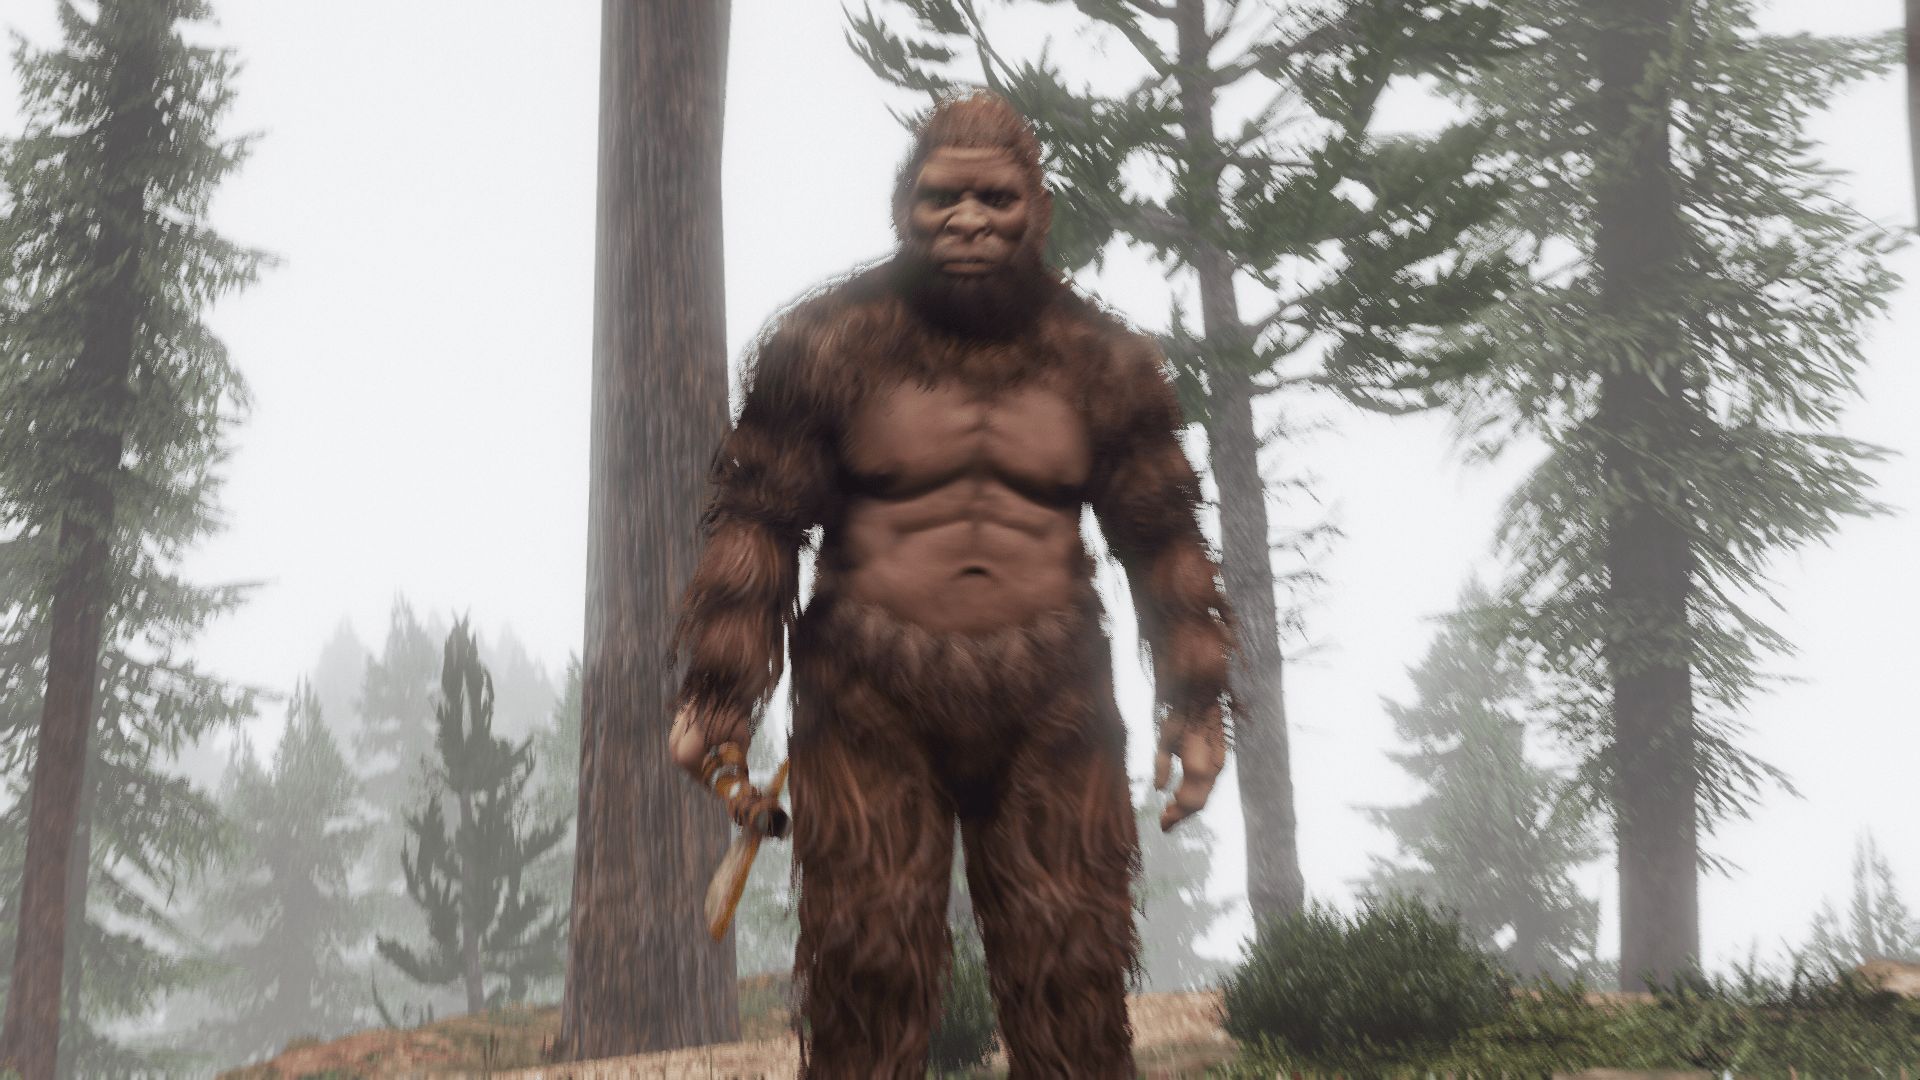 How to get the bigfoot outfit in GTA 5 Online?